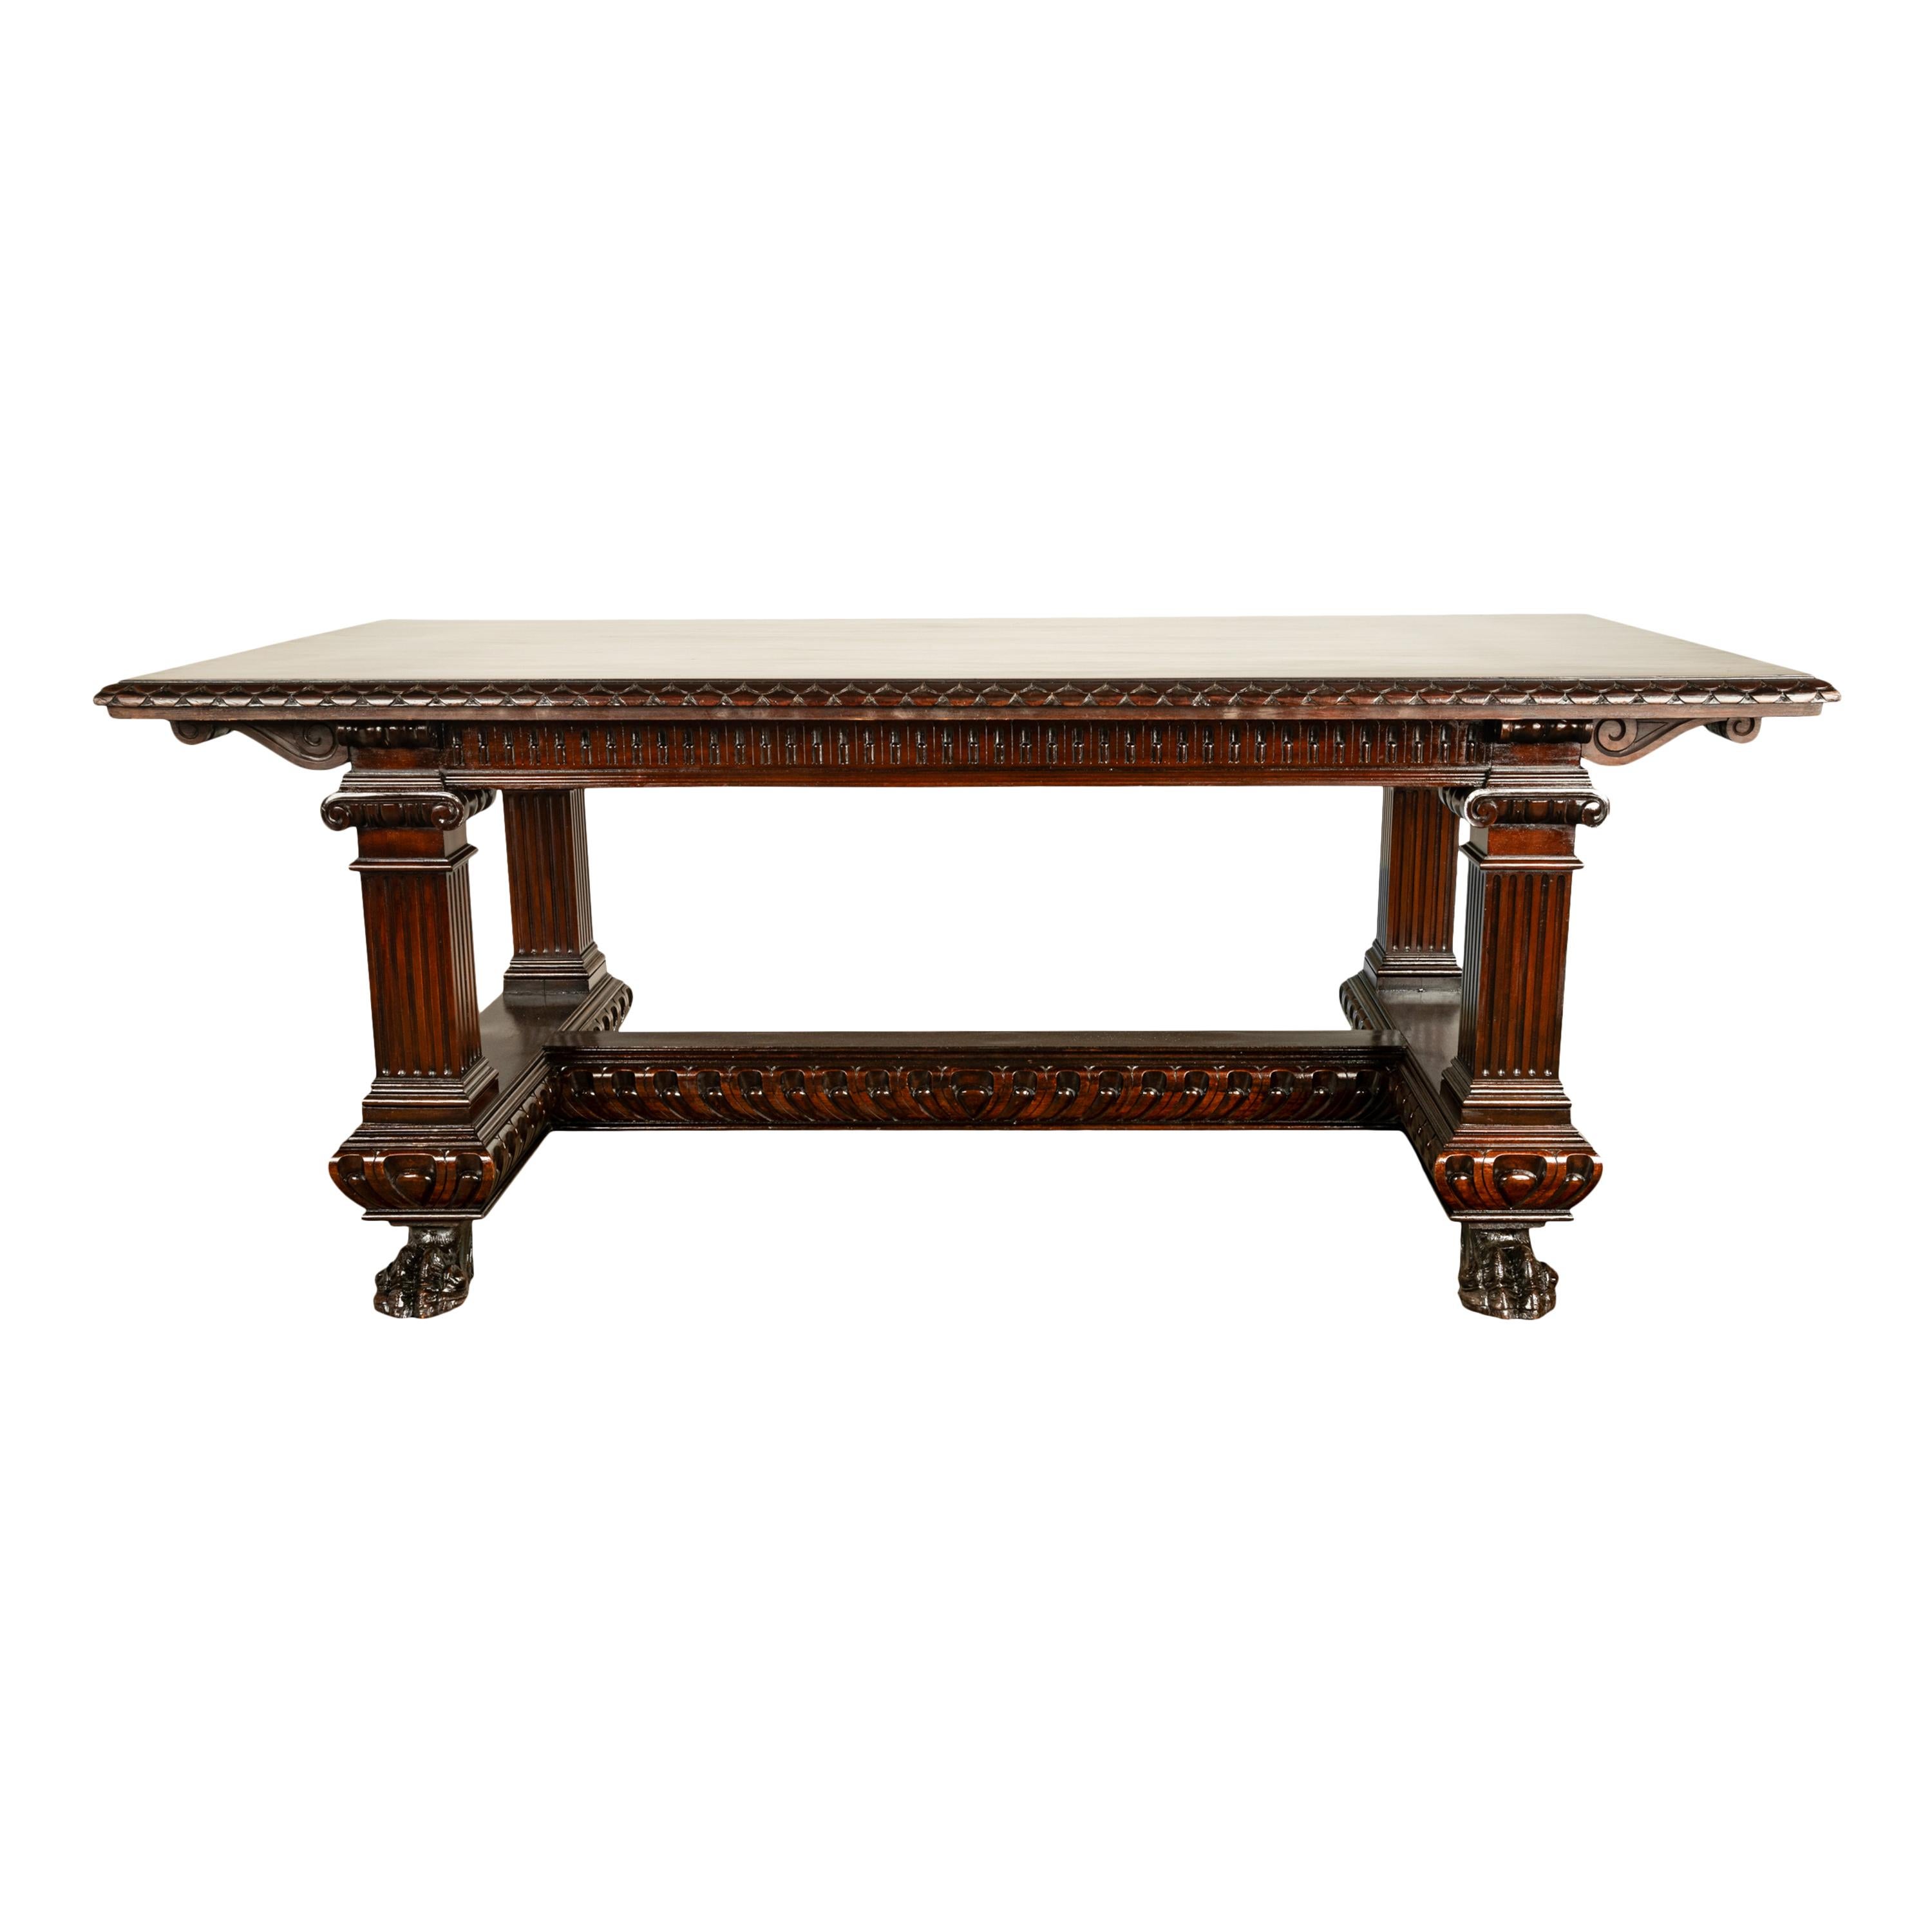 Antique Italian Carved Renaissance Revival Walnut Library Dining Table 1880 For Sale 6